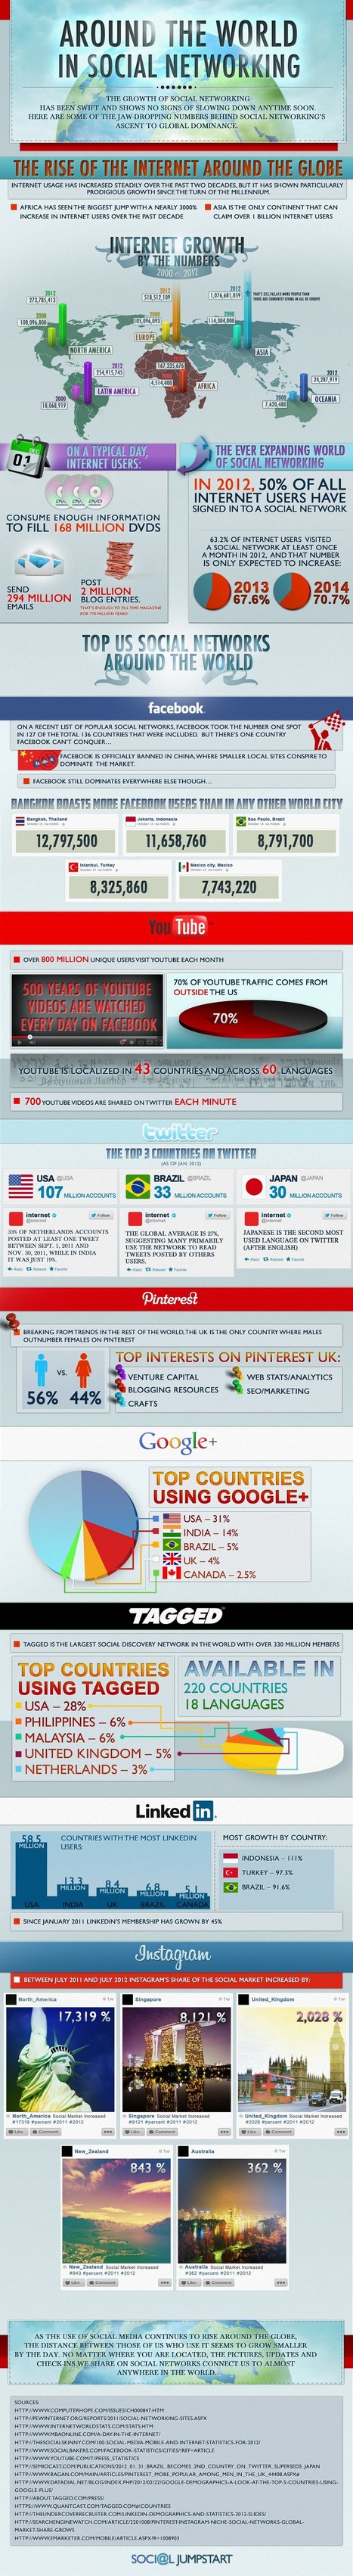 Social Media Around the World: A Complete Infographic Guide | Design, Science and Technology | Scoop.it